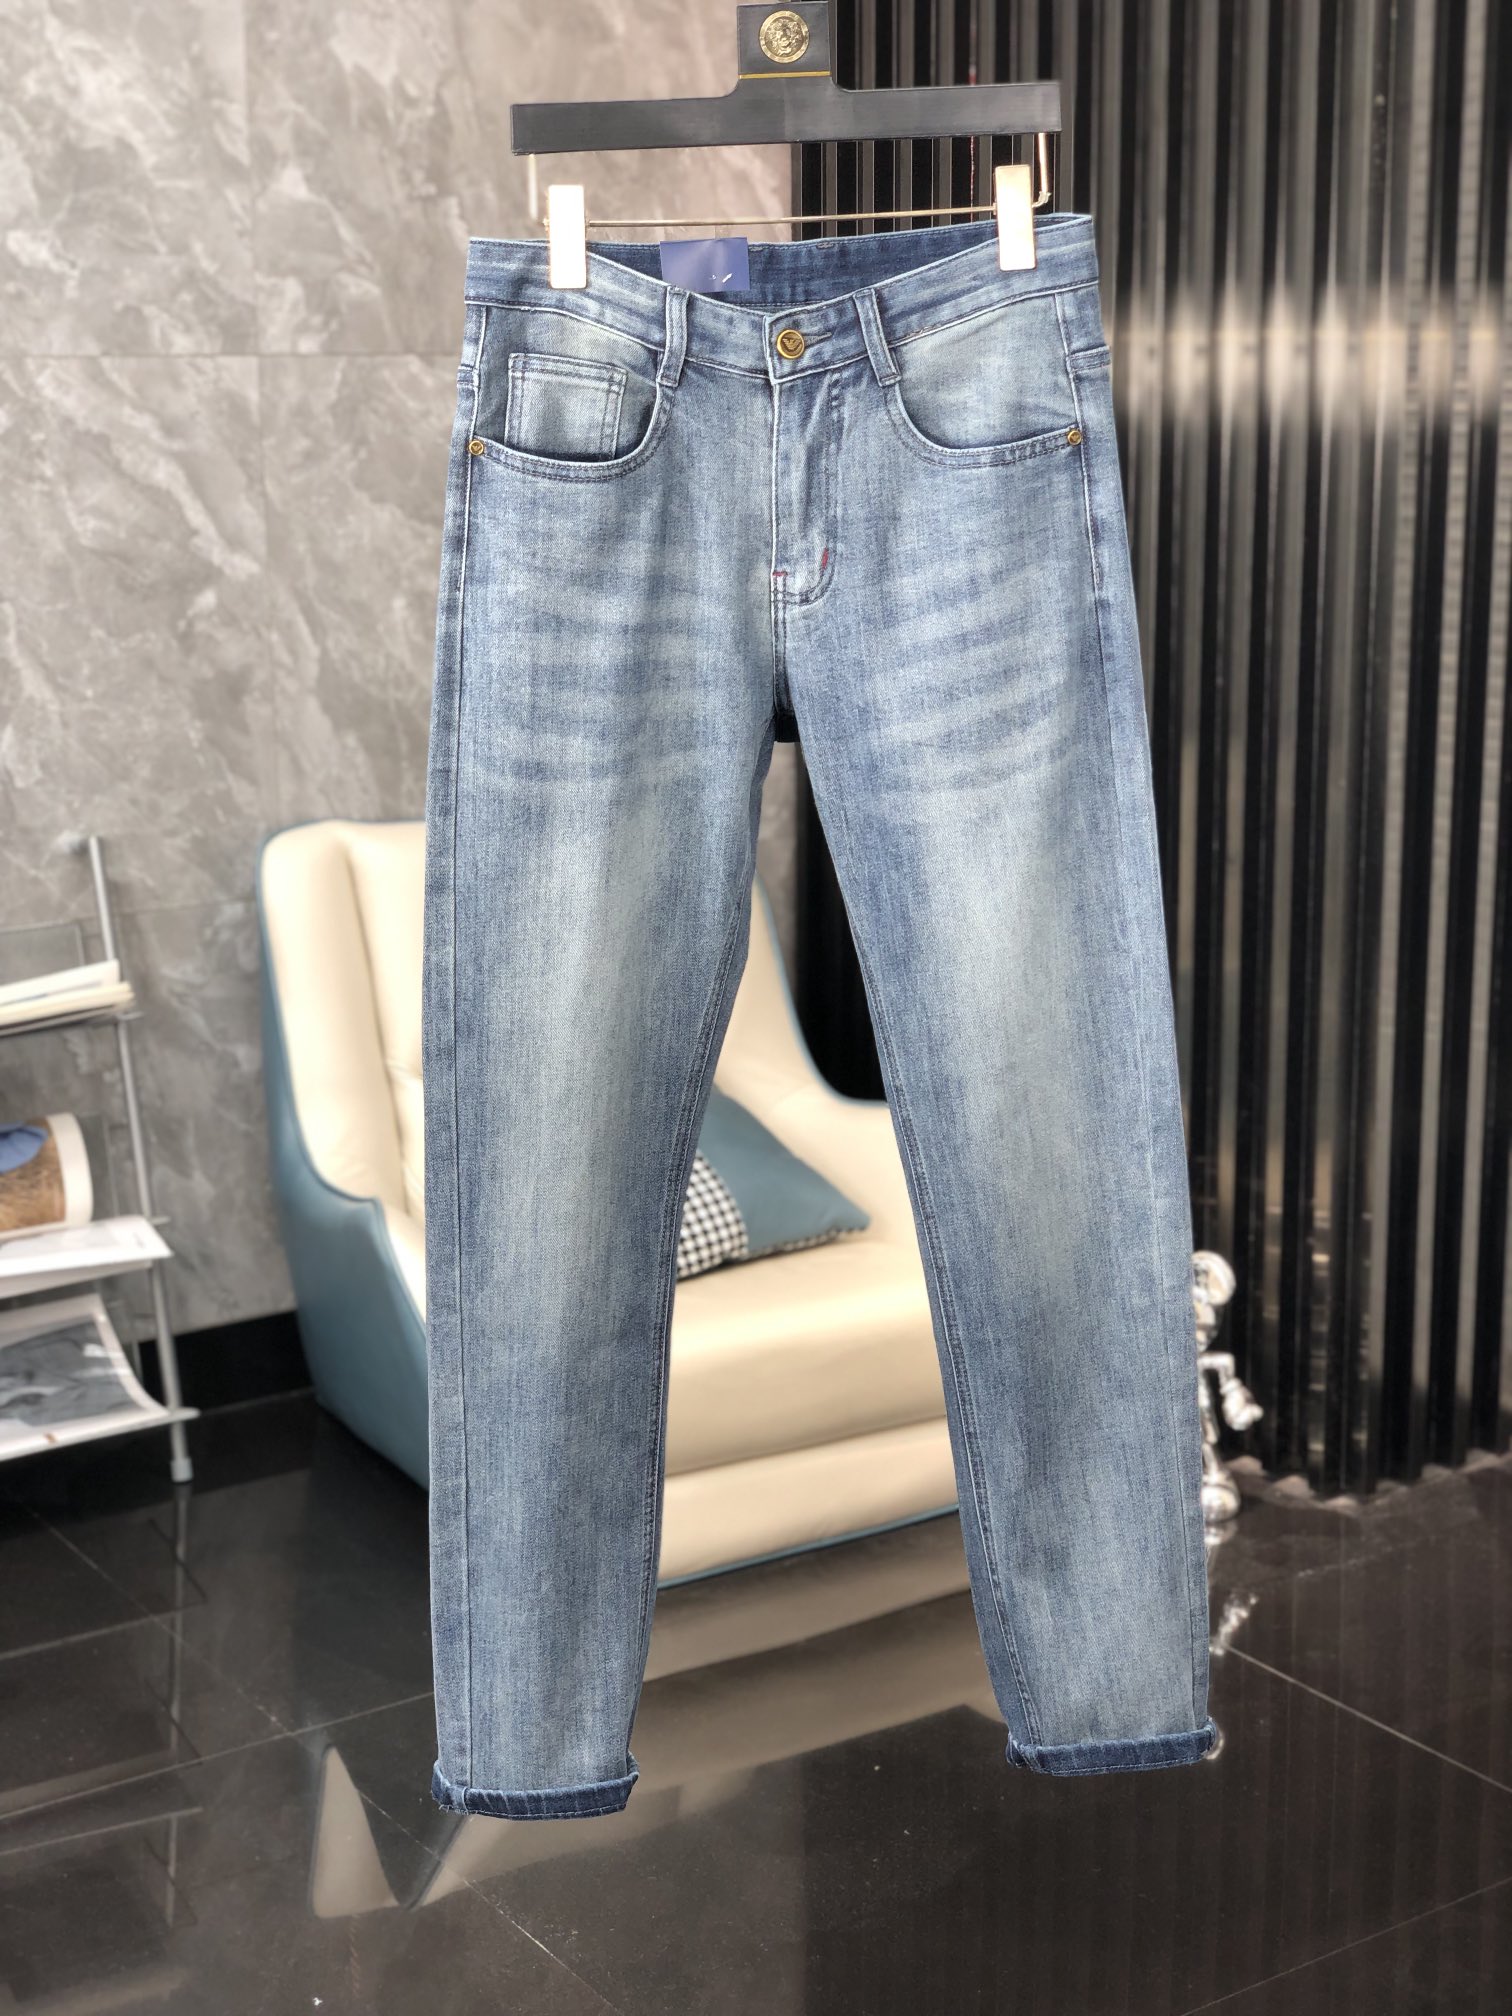 Armani Clothing Jeans Men Denim Genuine Leather Fall Collection Fashion